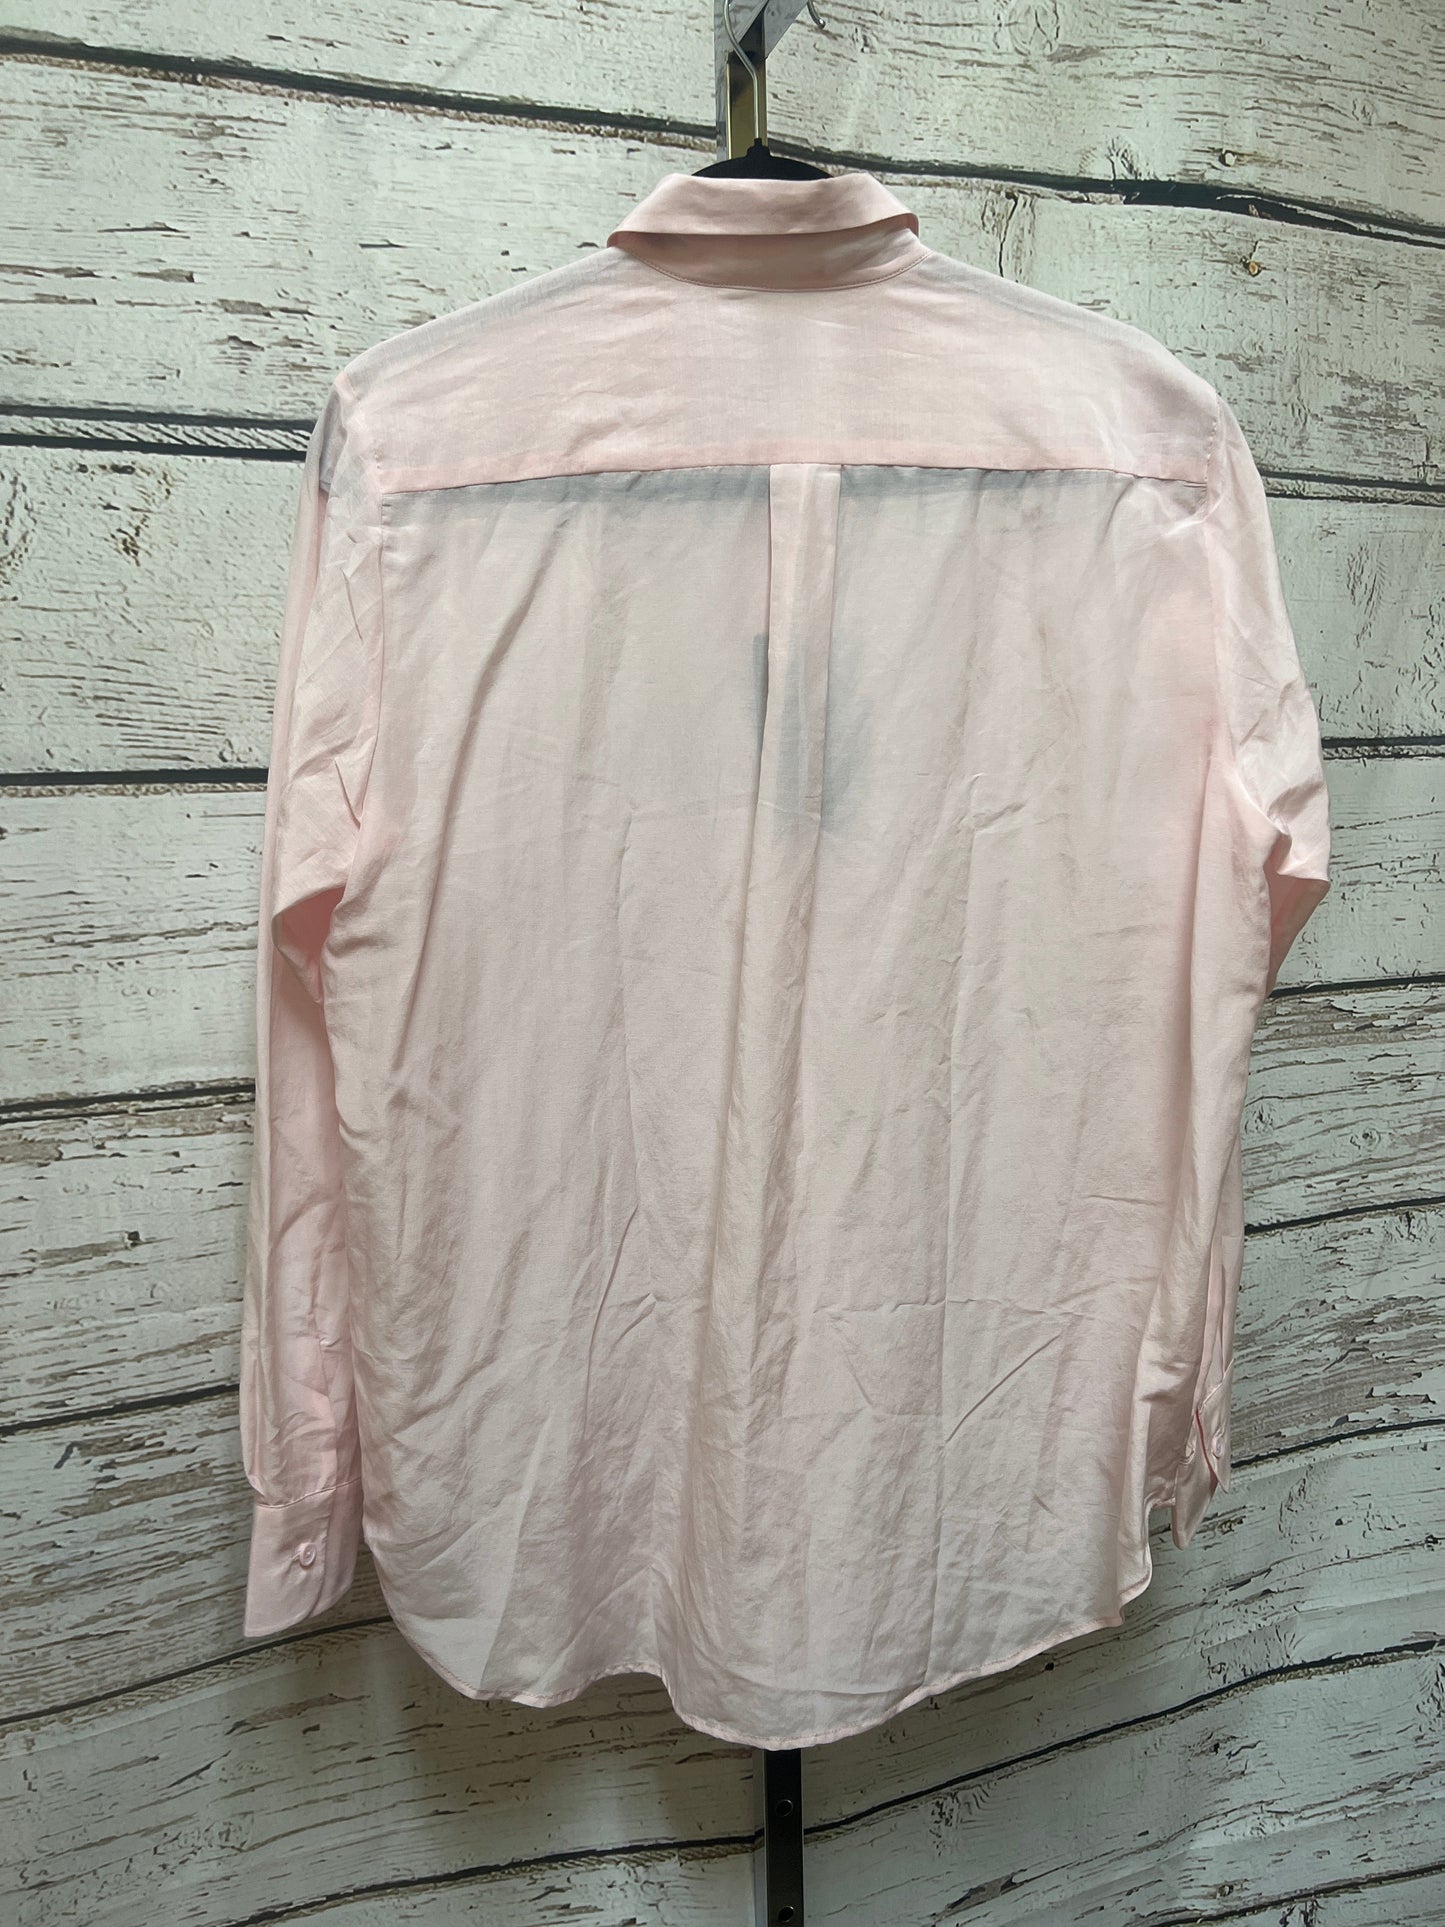 Pink Top Long Sleeve Cmc, Size L